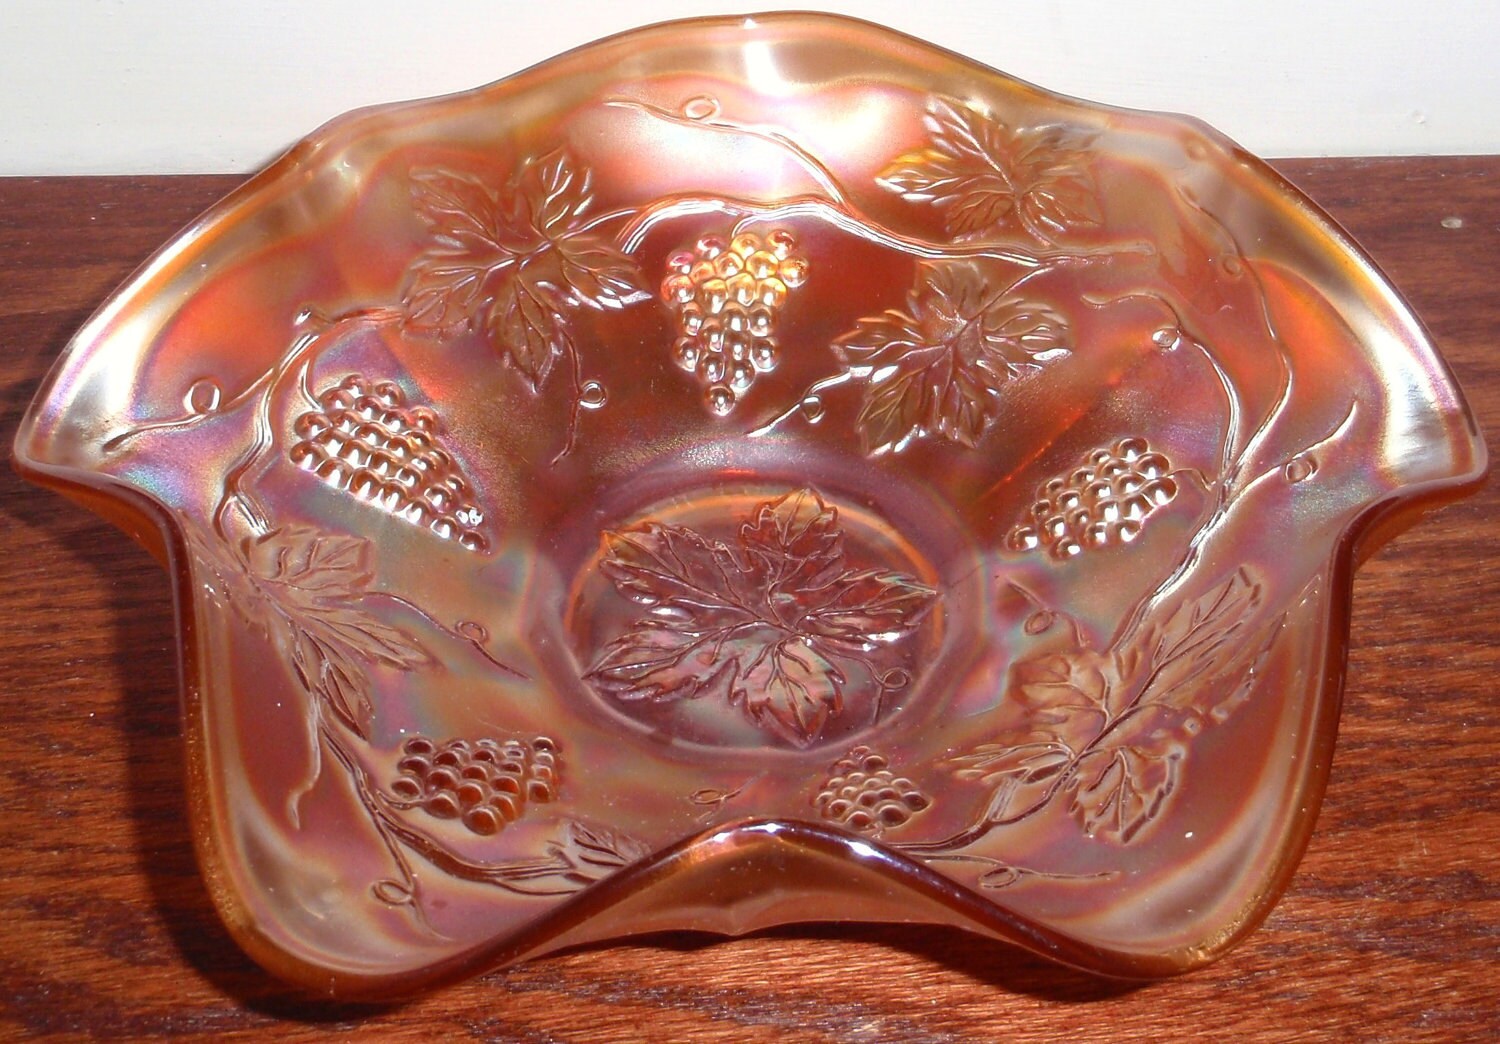 TRI-STATE ANTIQUES' CARNIVAL GLASS PAGE